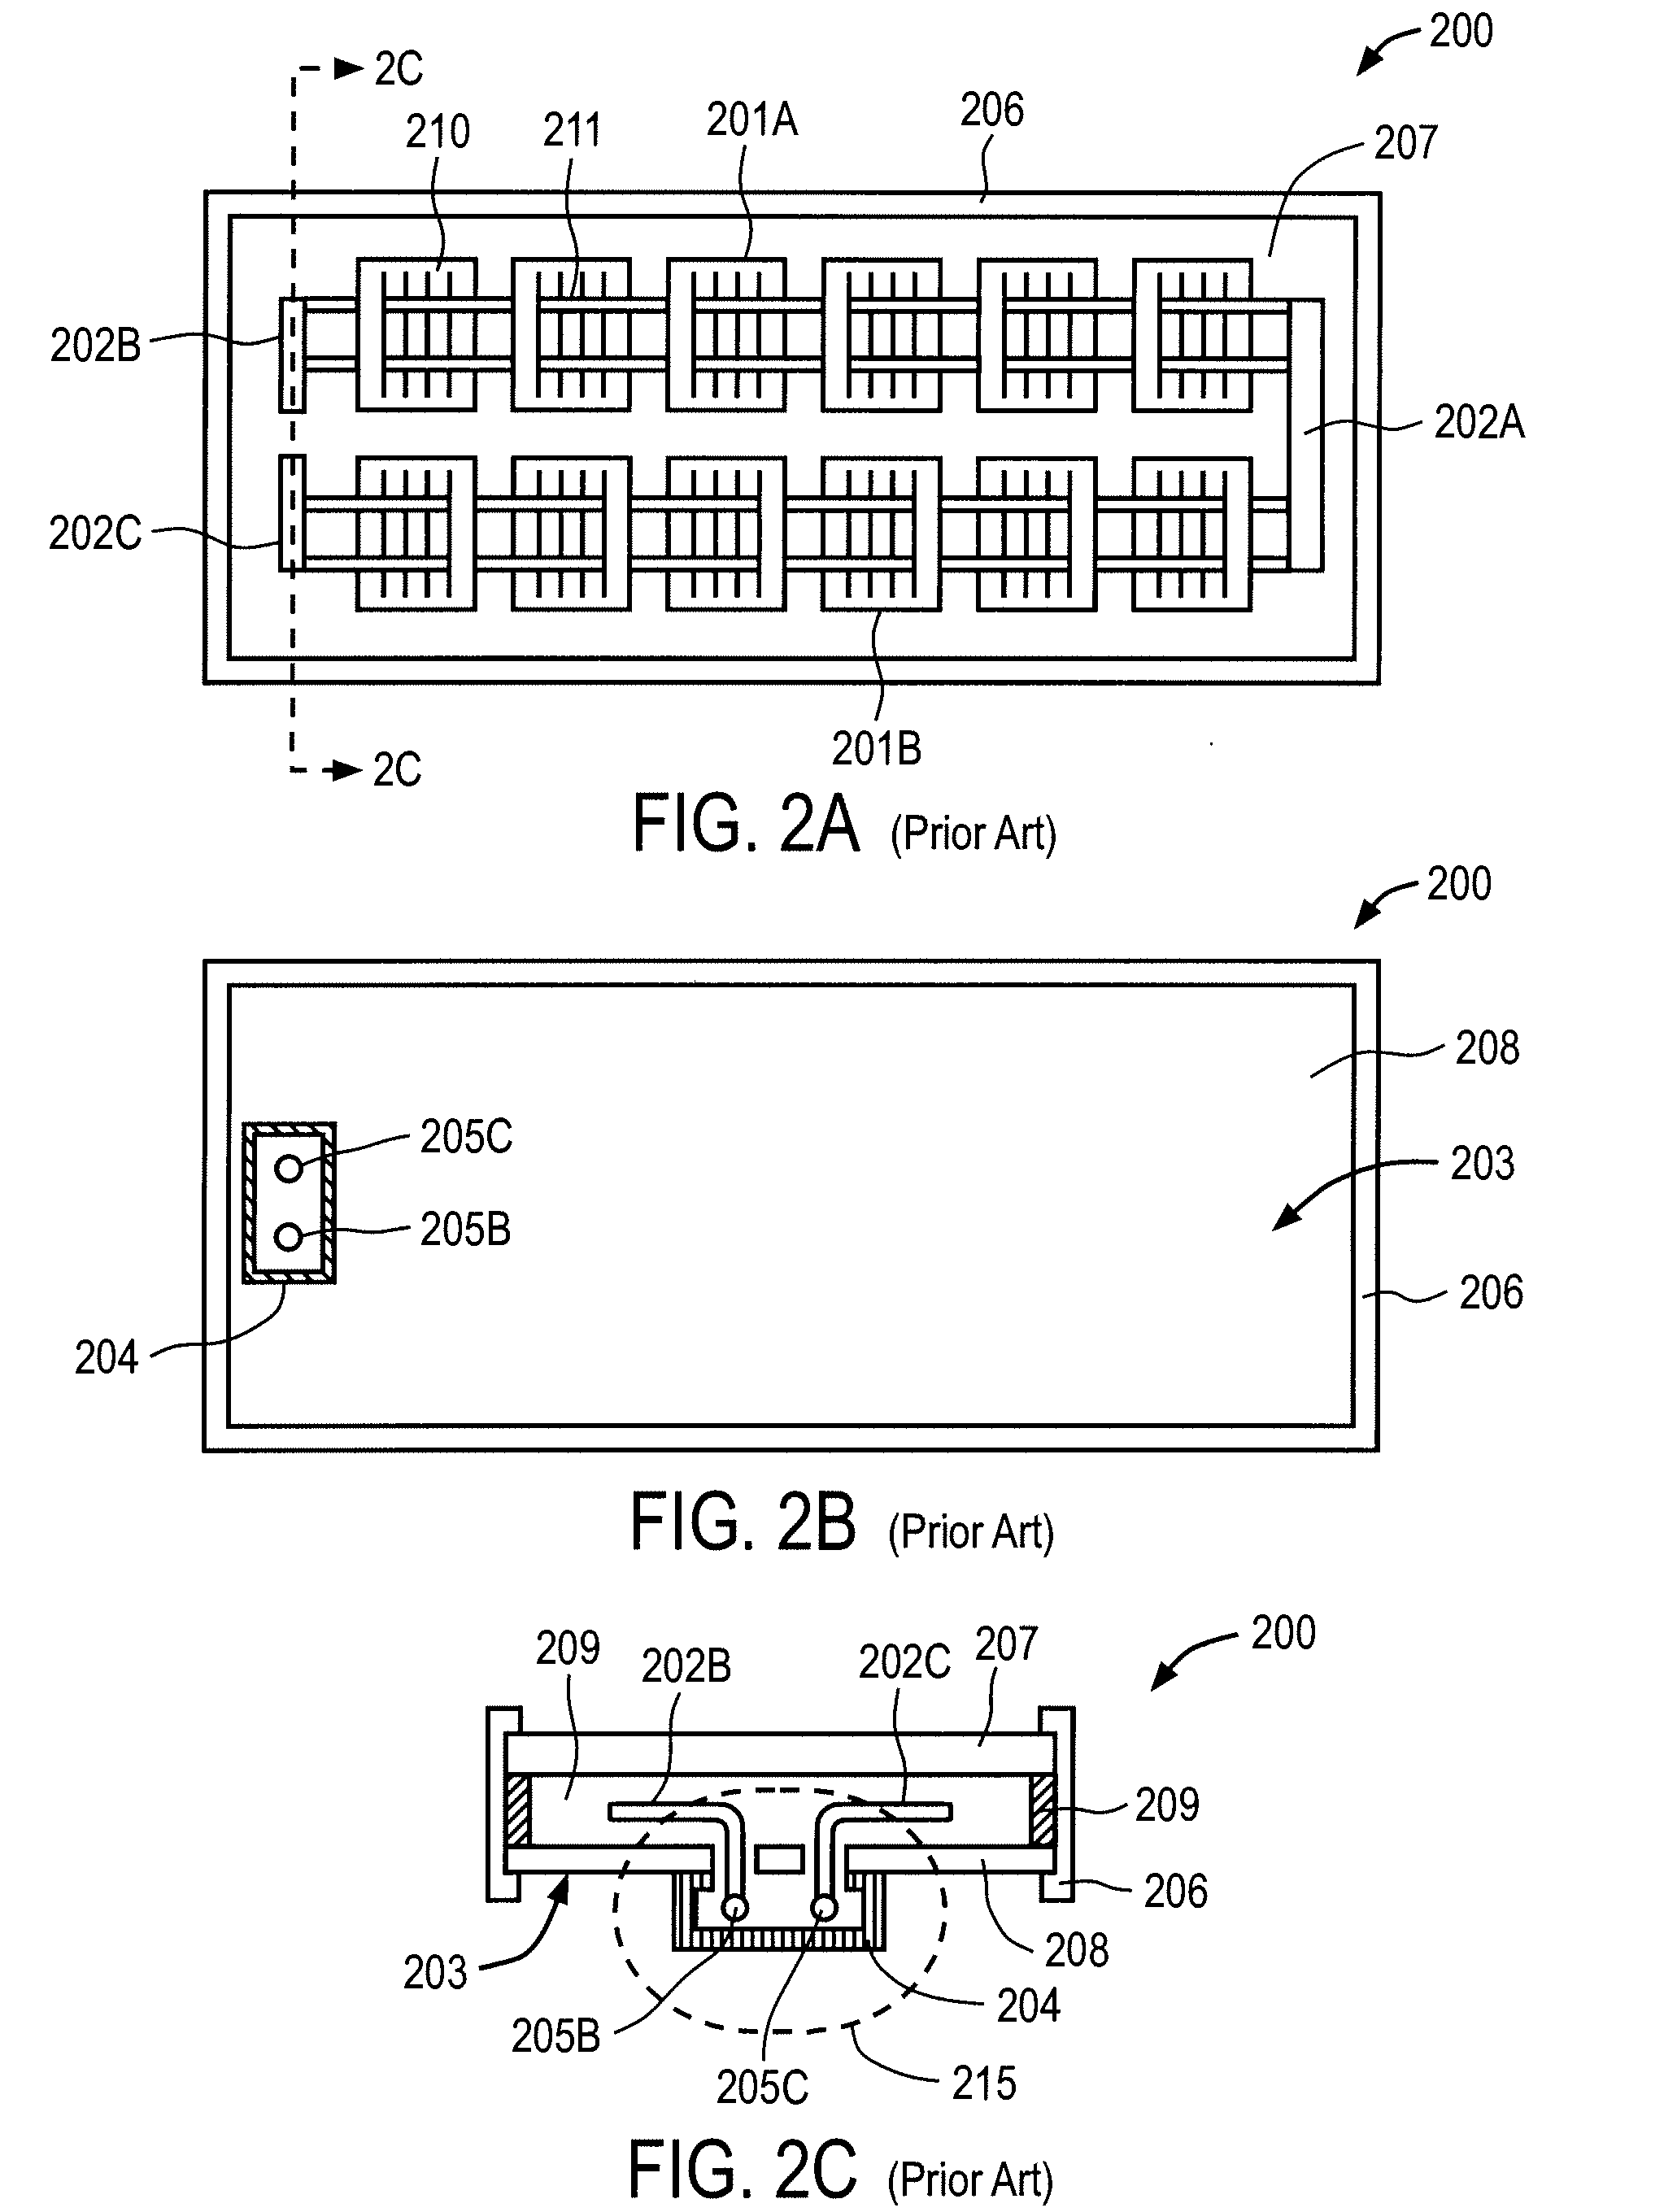 Reliable thin film photovoltaic module structures